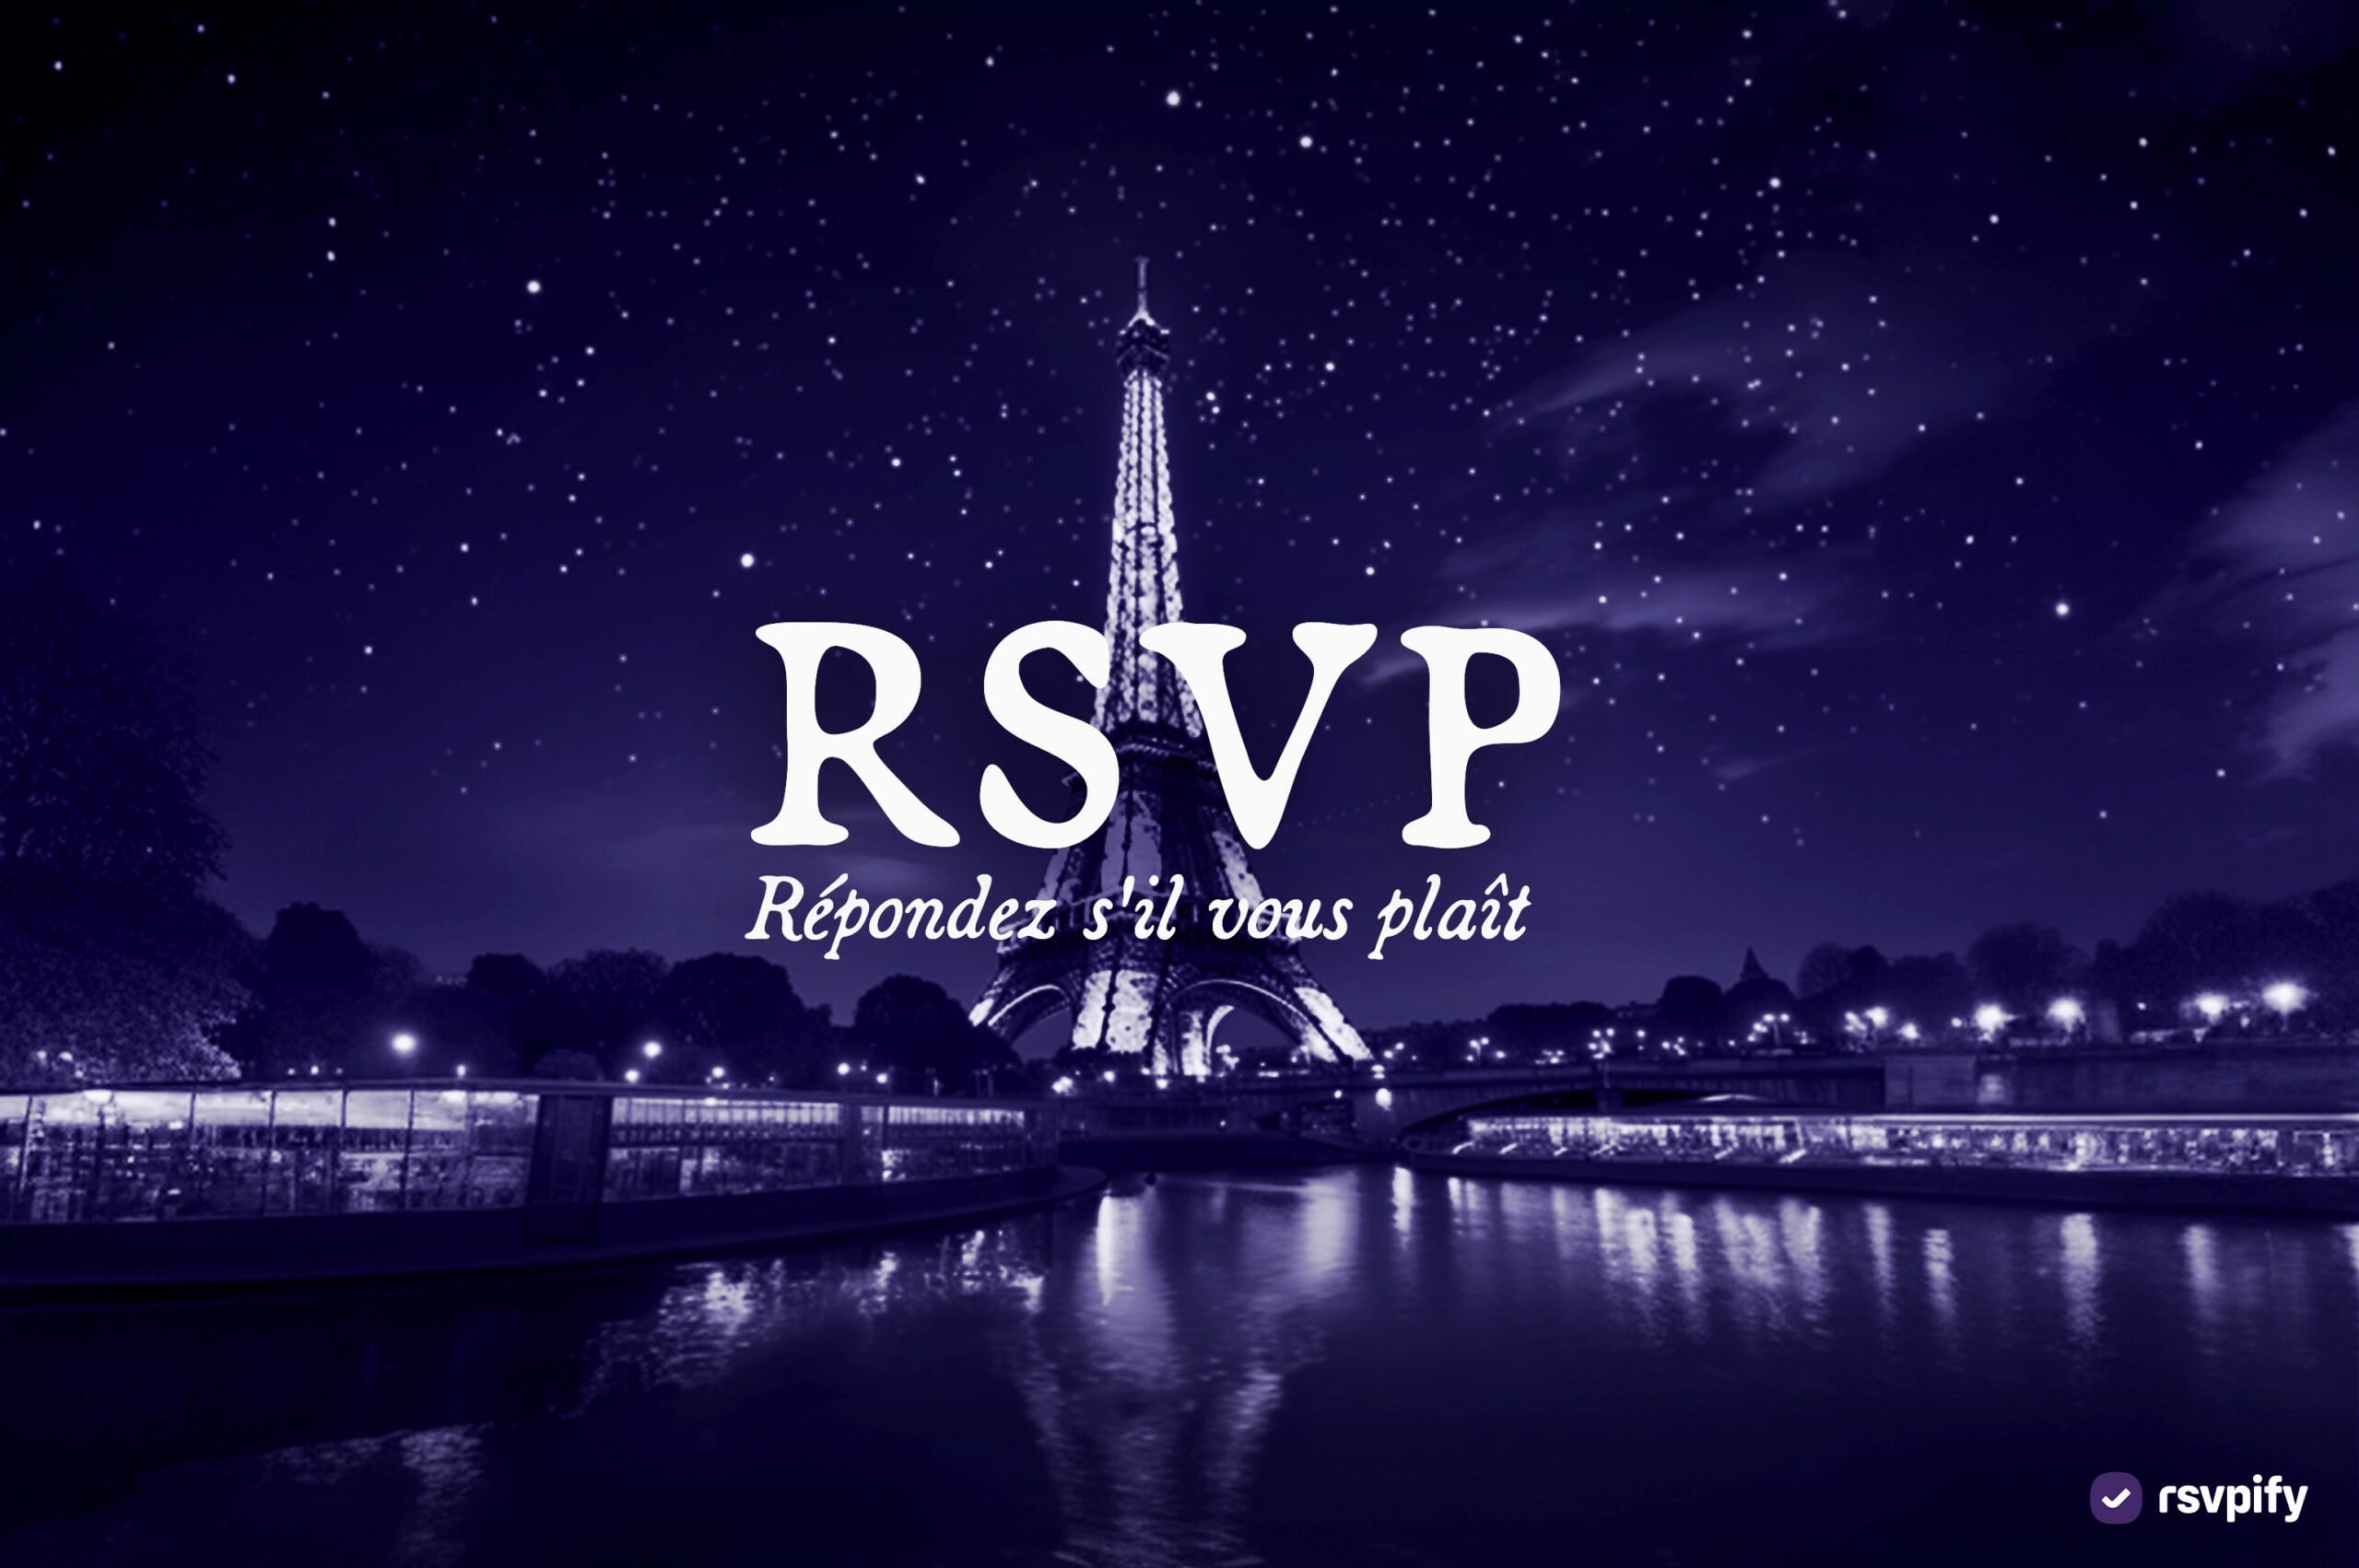 What does RSVP mean? Learn the history of this famous event term